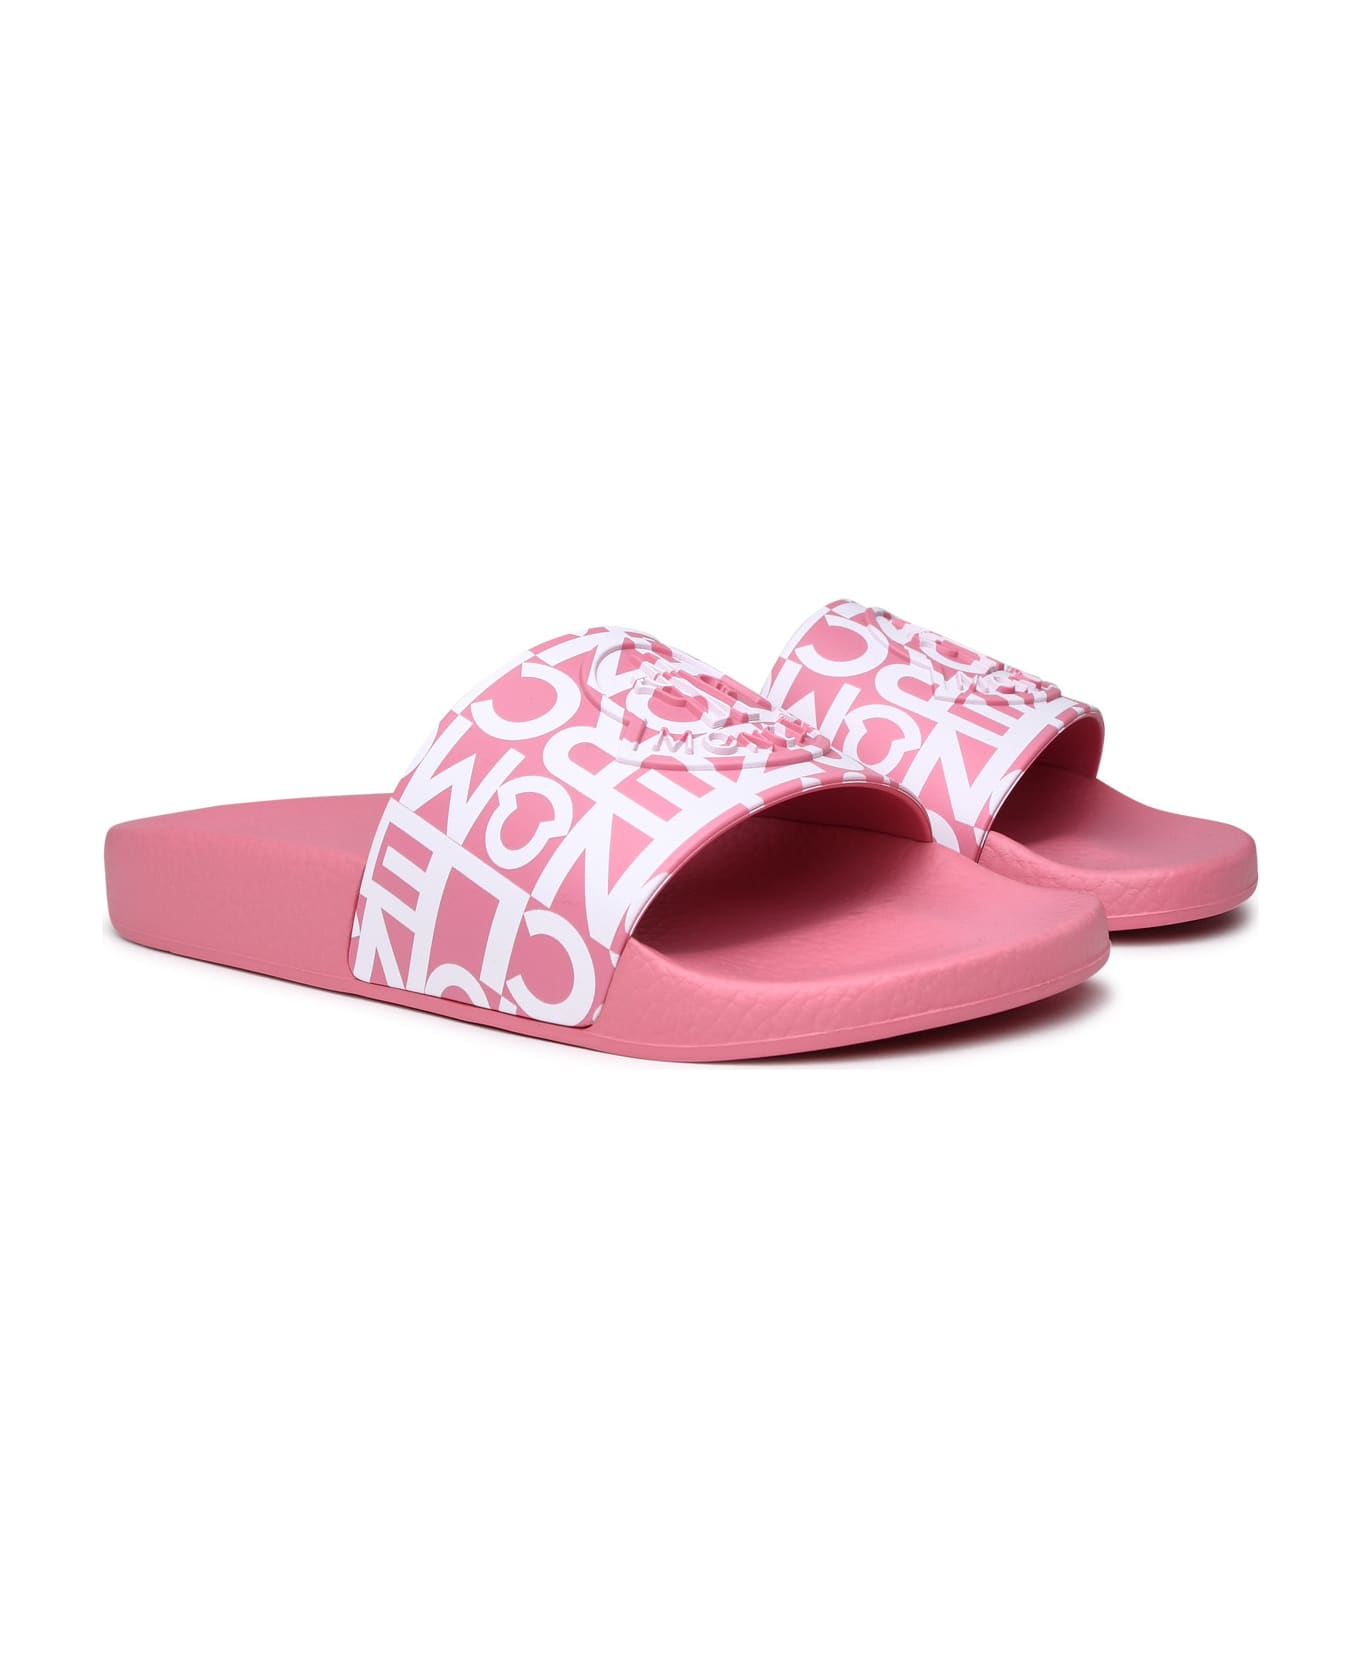 Moncler Jane Rose Rubber Slippers - Pink サンダル